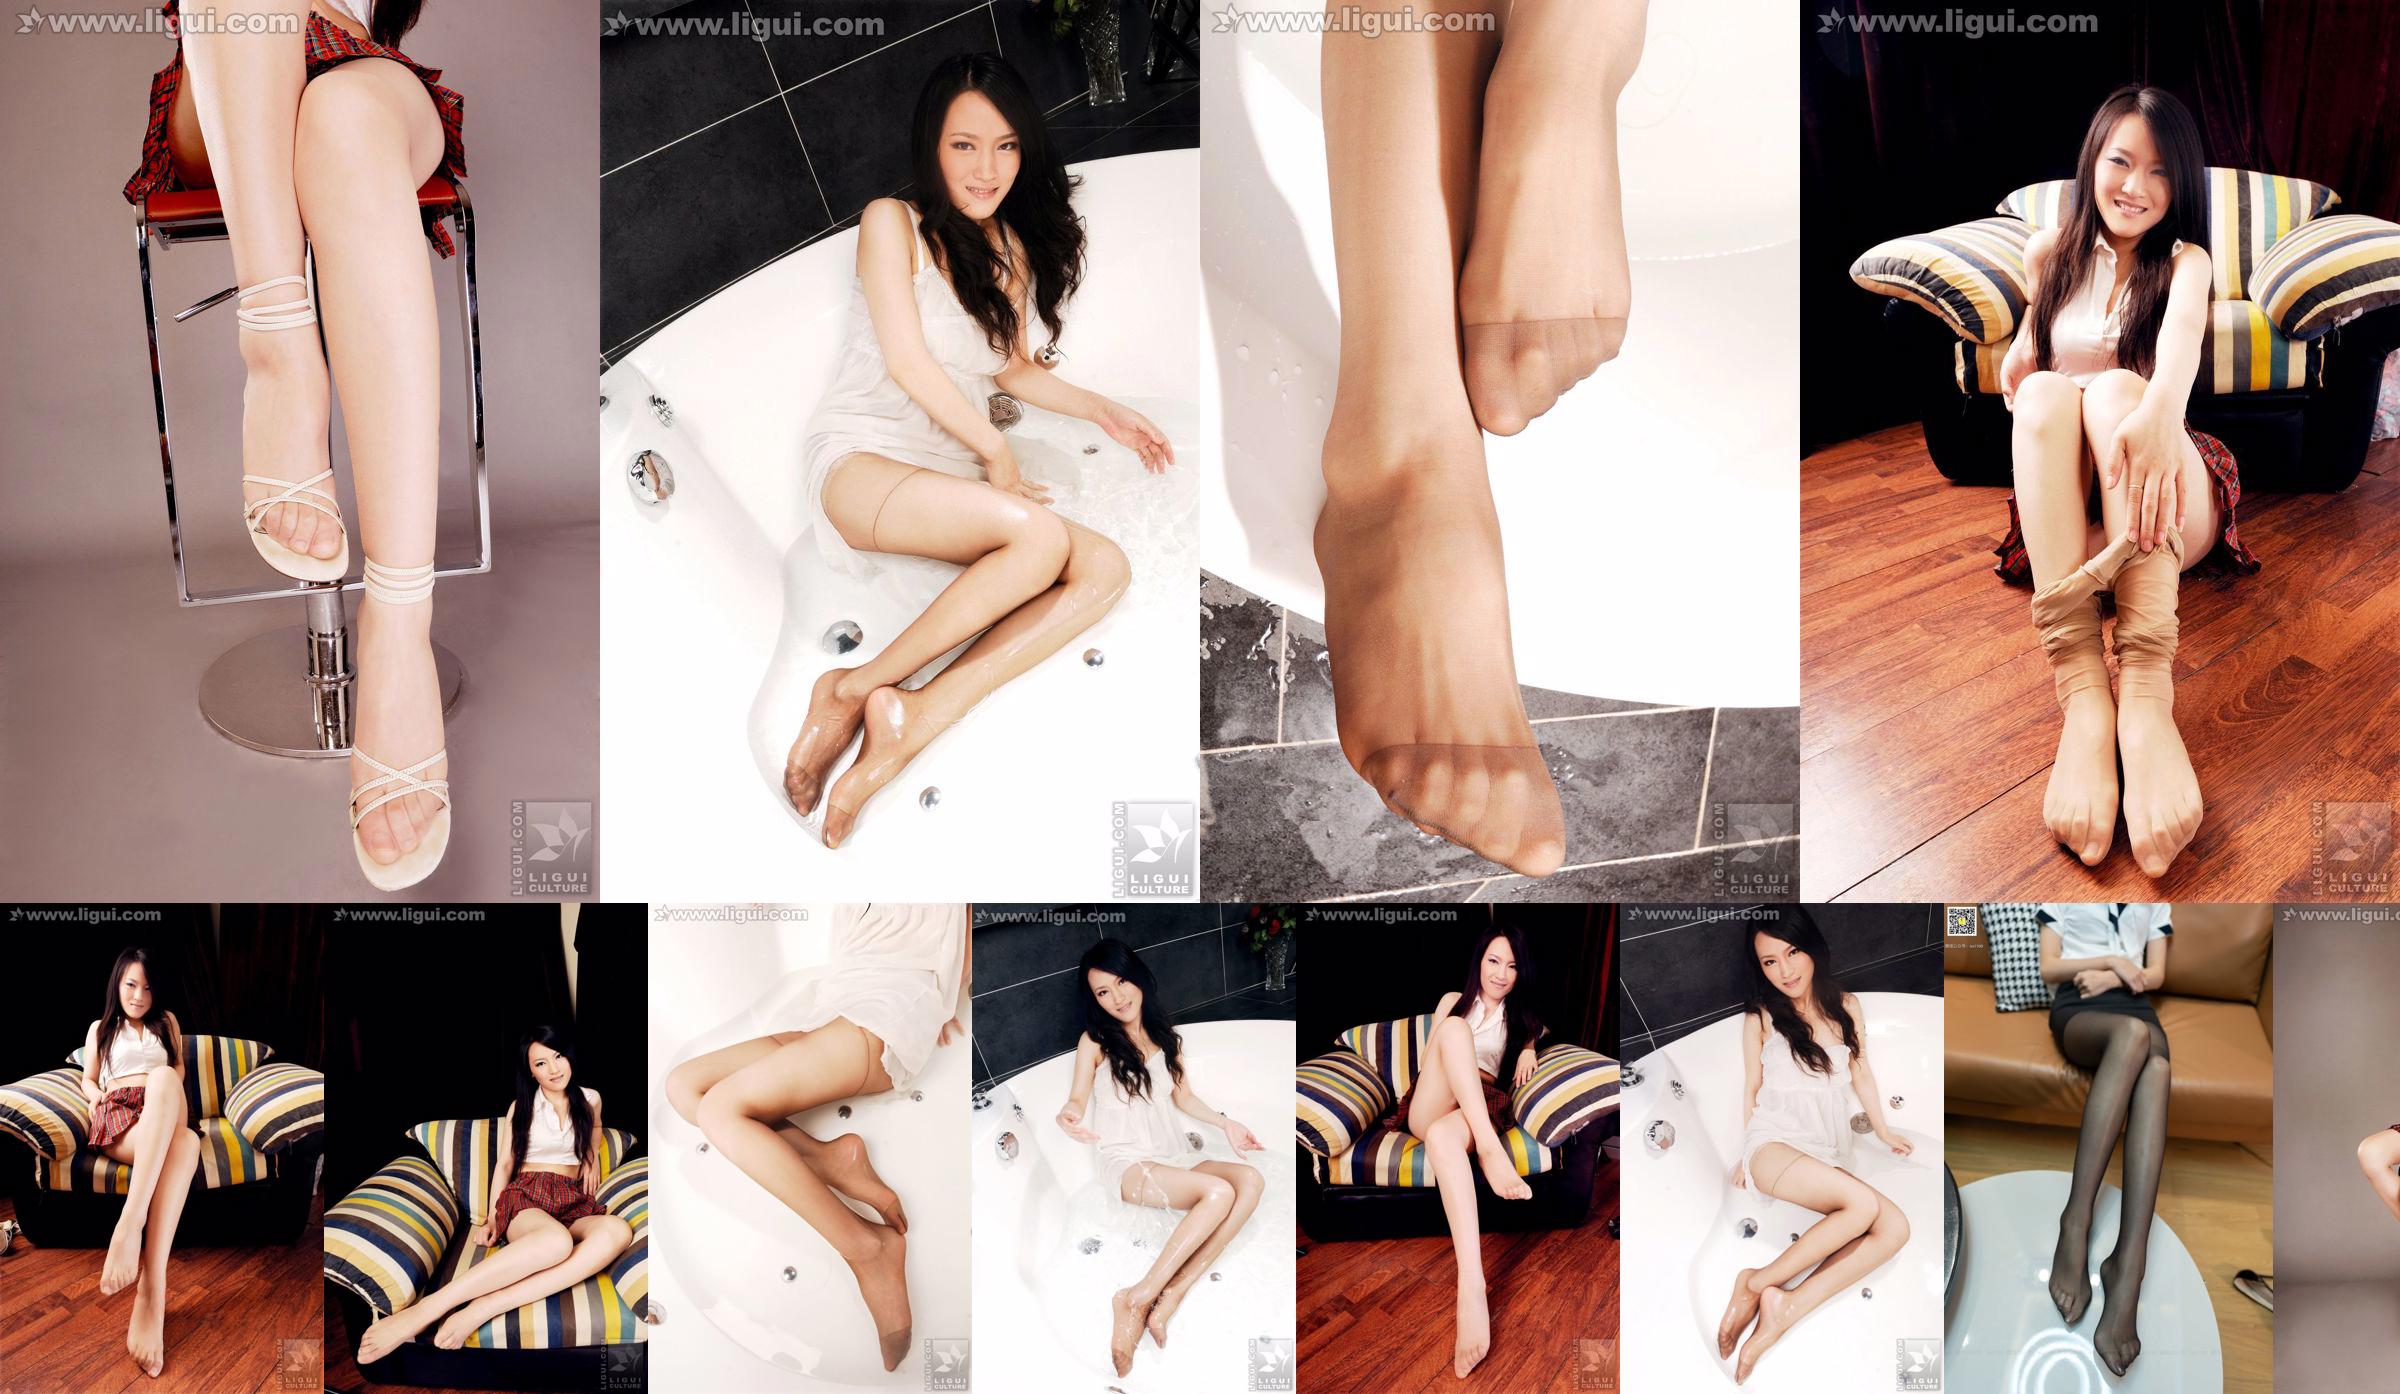 Model Wen Ting "Pure and Beautiful Feet" [丽柜LiGui] Silk Foot Photo Picture No.31fcaf Page 9